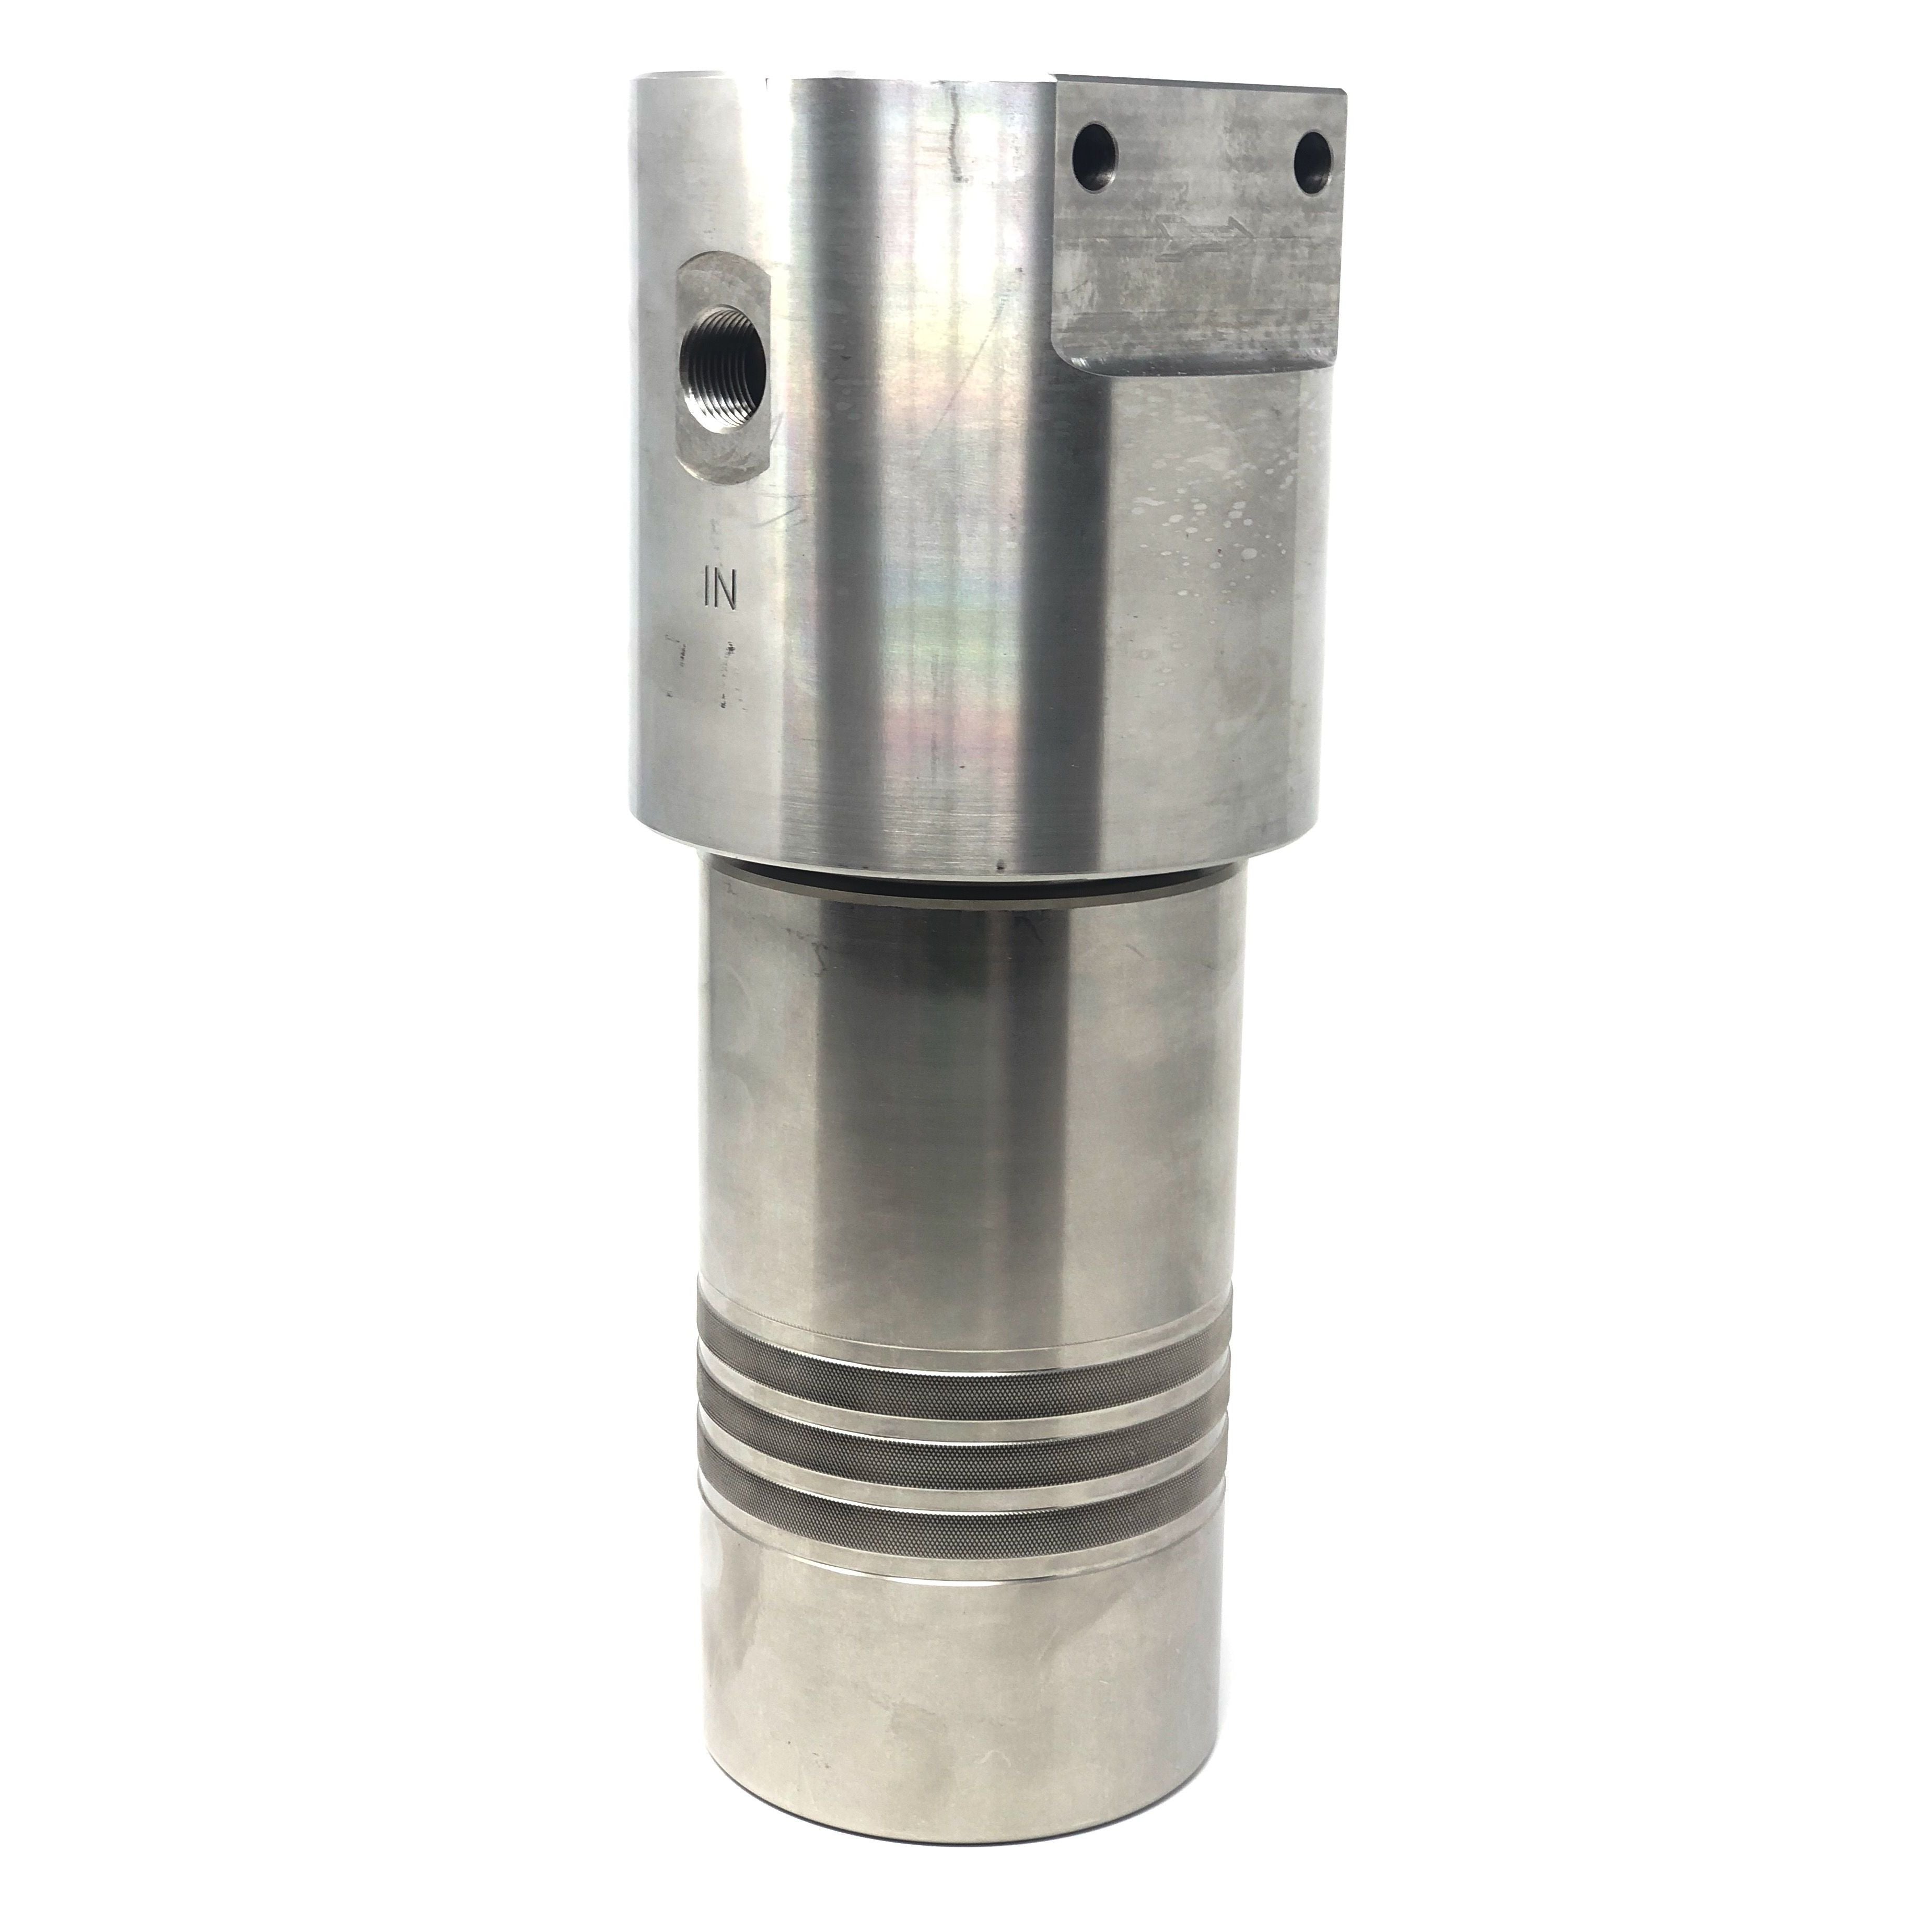 52S-244S-12MDN : Chase Ultra High Pressure Inline Filter, 10000psi, #4 SAE (1/4"), 12 Micron, With Visual Indicator, No Bypass